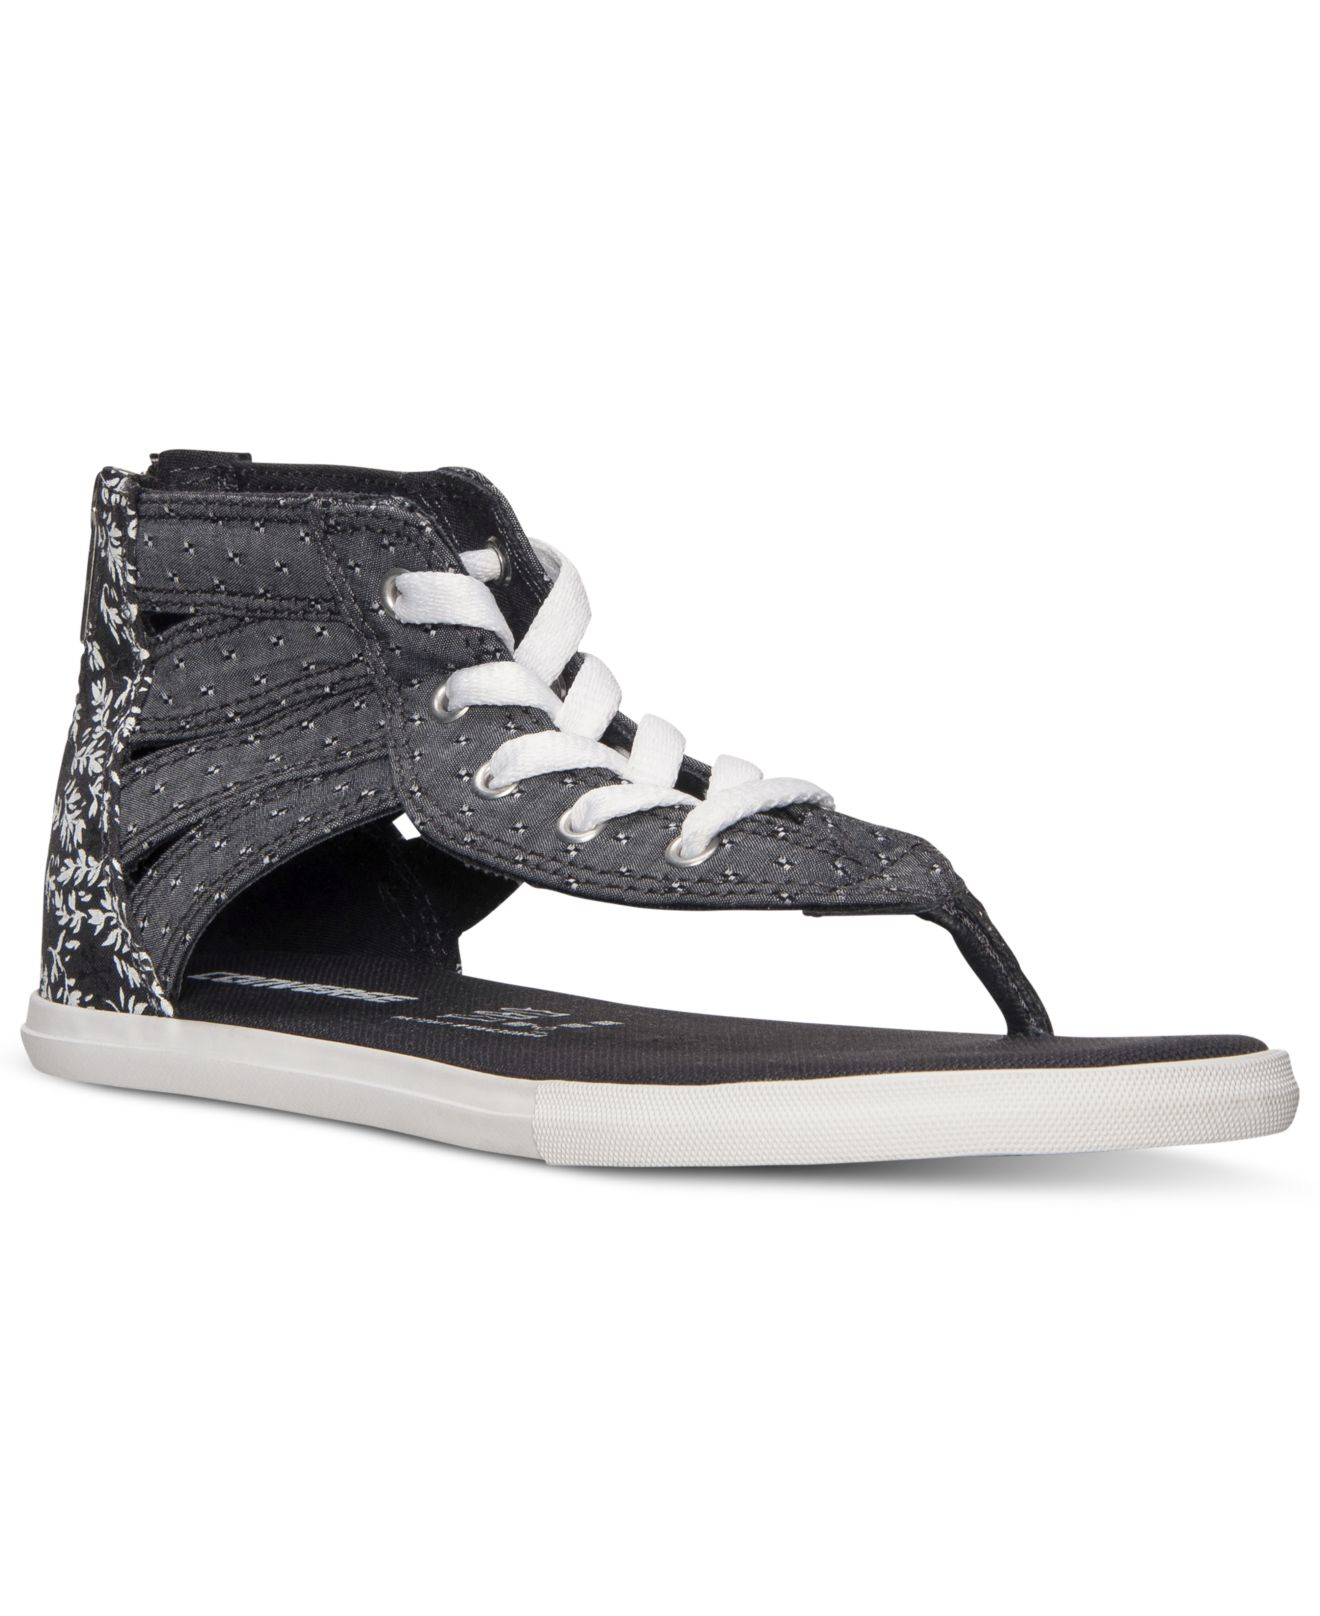 Converse Women'S Chuck Taylor Gladiator Thong Sandals From Finish Line in  Black | Lyst